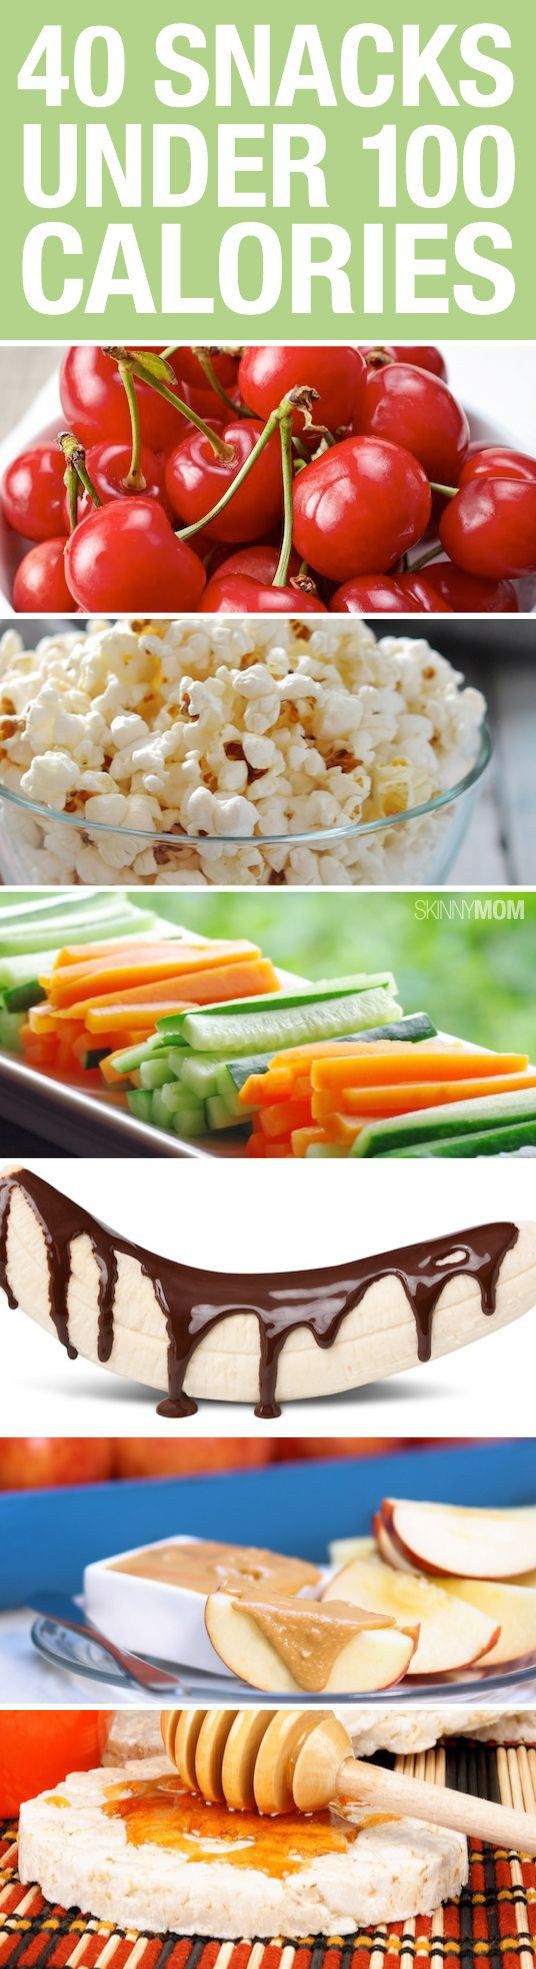 Low Calorie Popcorn Recipes
 The 39 Best Tasting Snacks Less Than 100 Calories